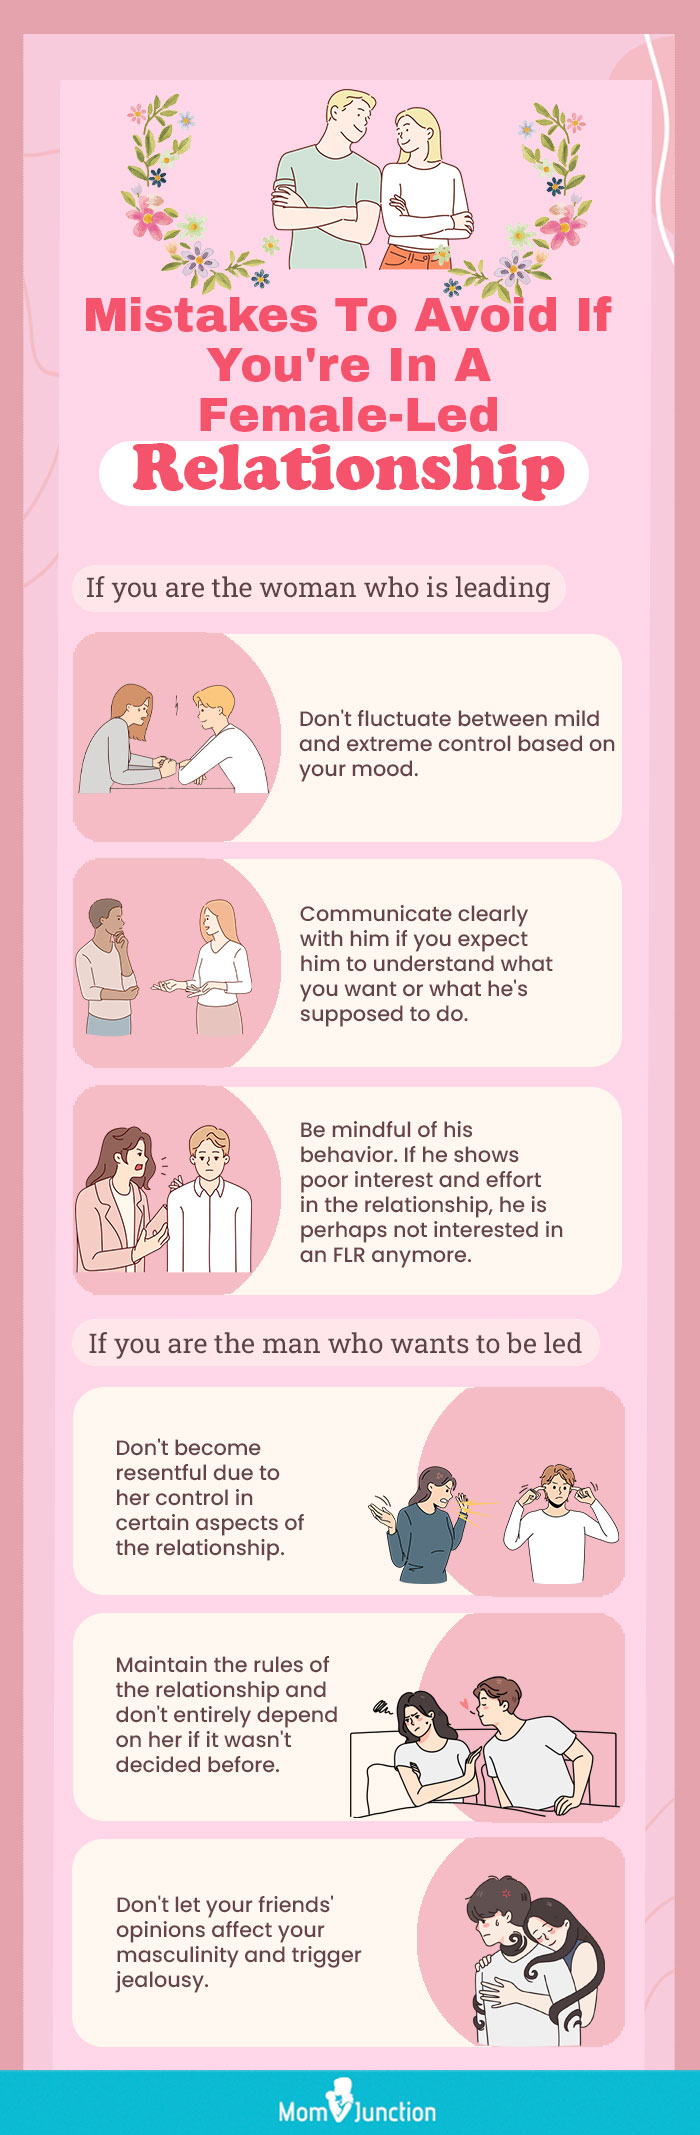 how not to behave in a female-led relationship (infographic)